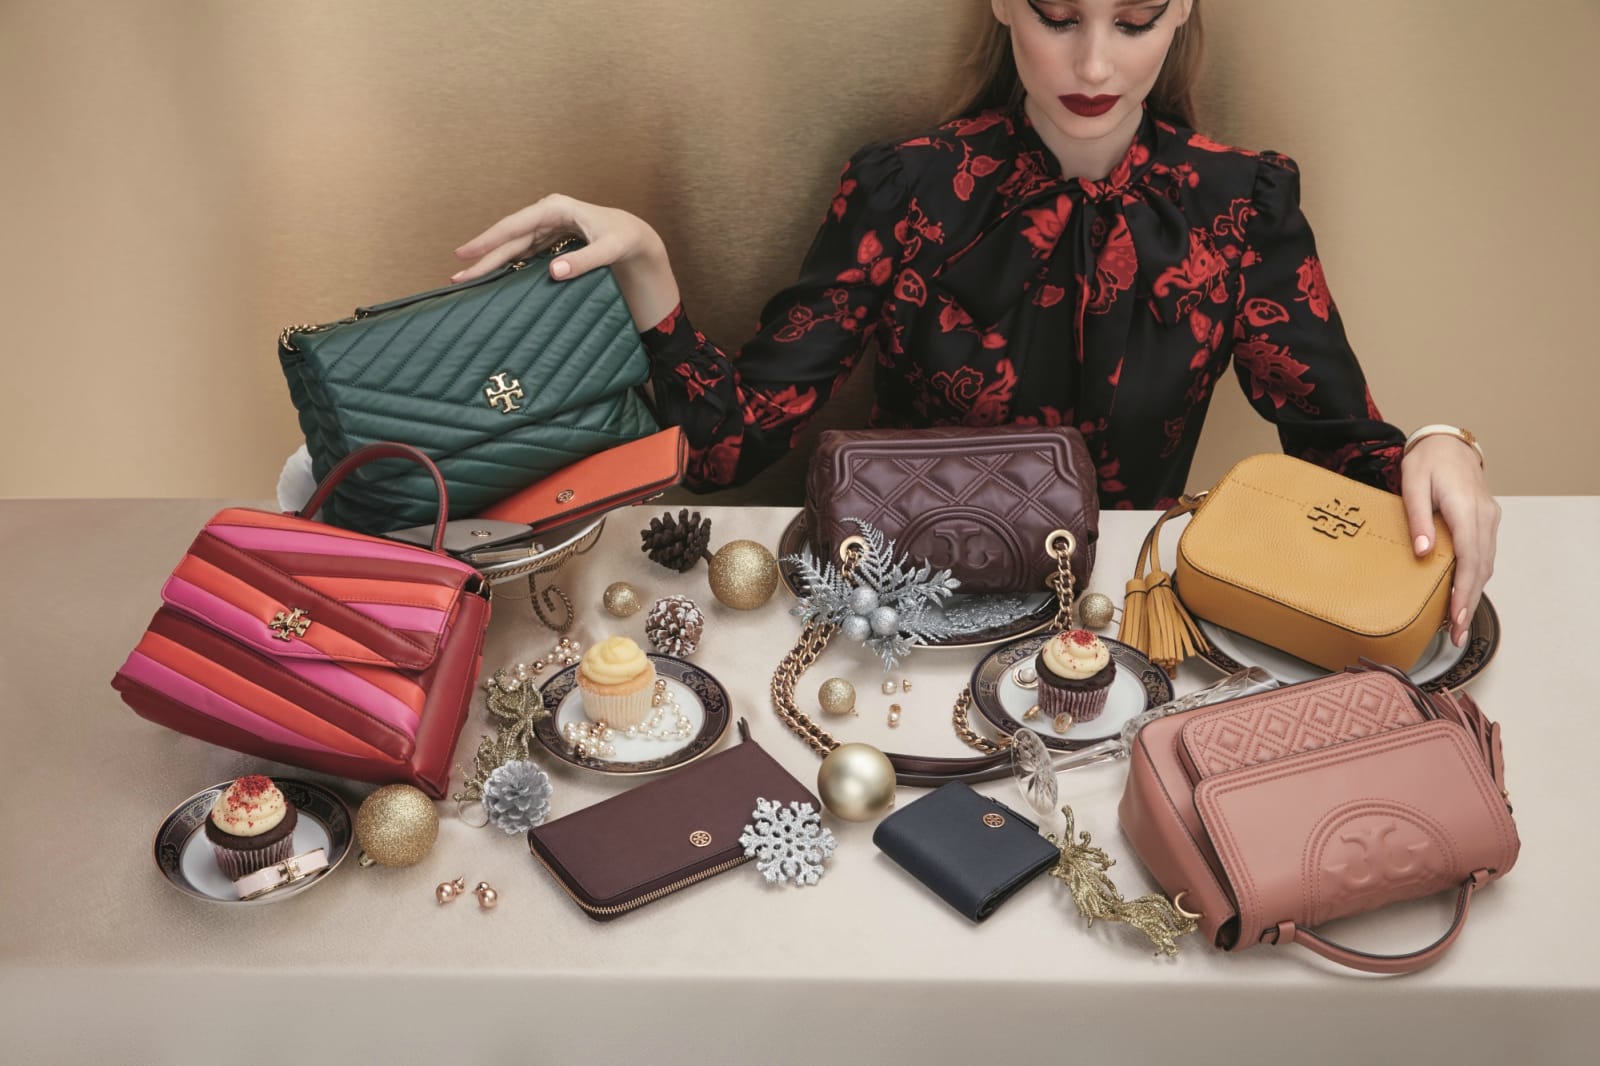 From left to right: Kira Chevron Colour-Block Top-Handle Satchel; Kira Chevron Convertible Shoulder Bag; Fleming Soft Convertible Shoulder Bag; Fleming Convertible Shoulder Bag; McGraw Camera Bag; top; wallets; and jewellery, all from Tory Burch.